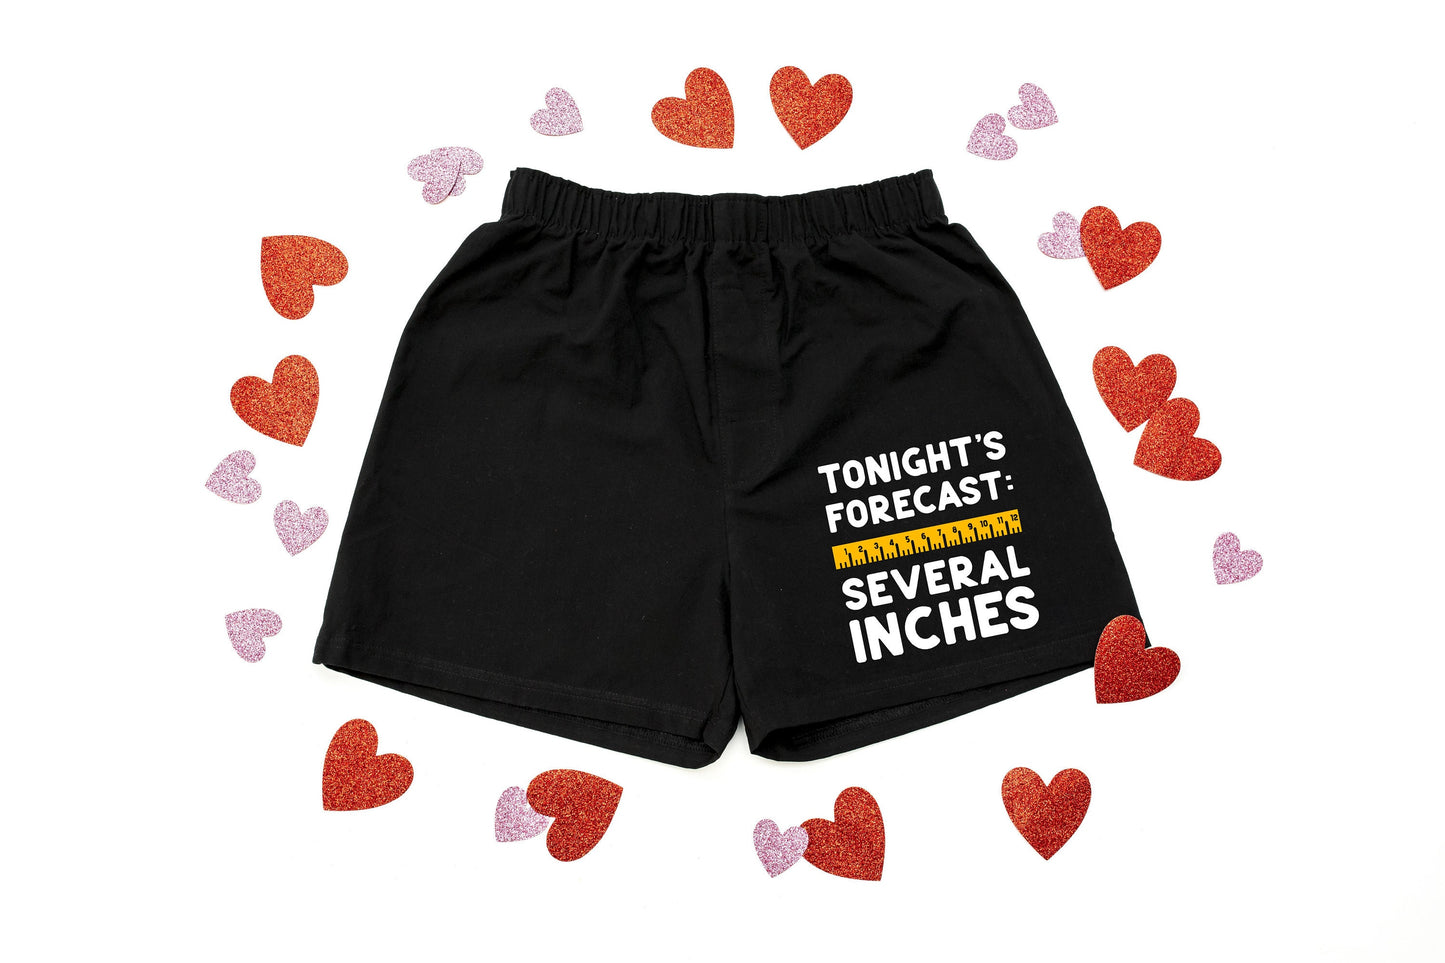 Tonight's Forecast Several Inches Men's Super Soft Cotton Boxer Shorts - Gift for Him - Mens Boxers - Funny Boxers - Naughty Boxers